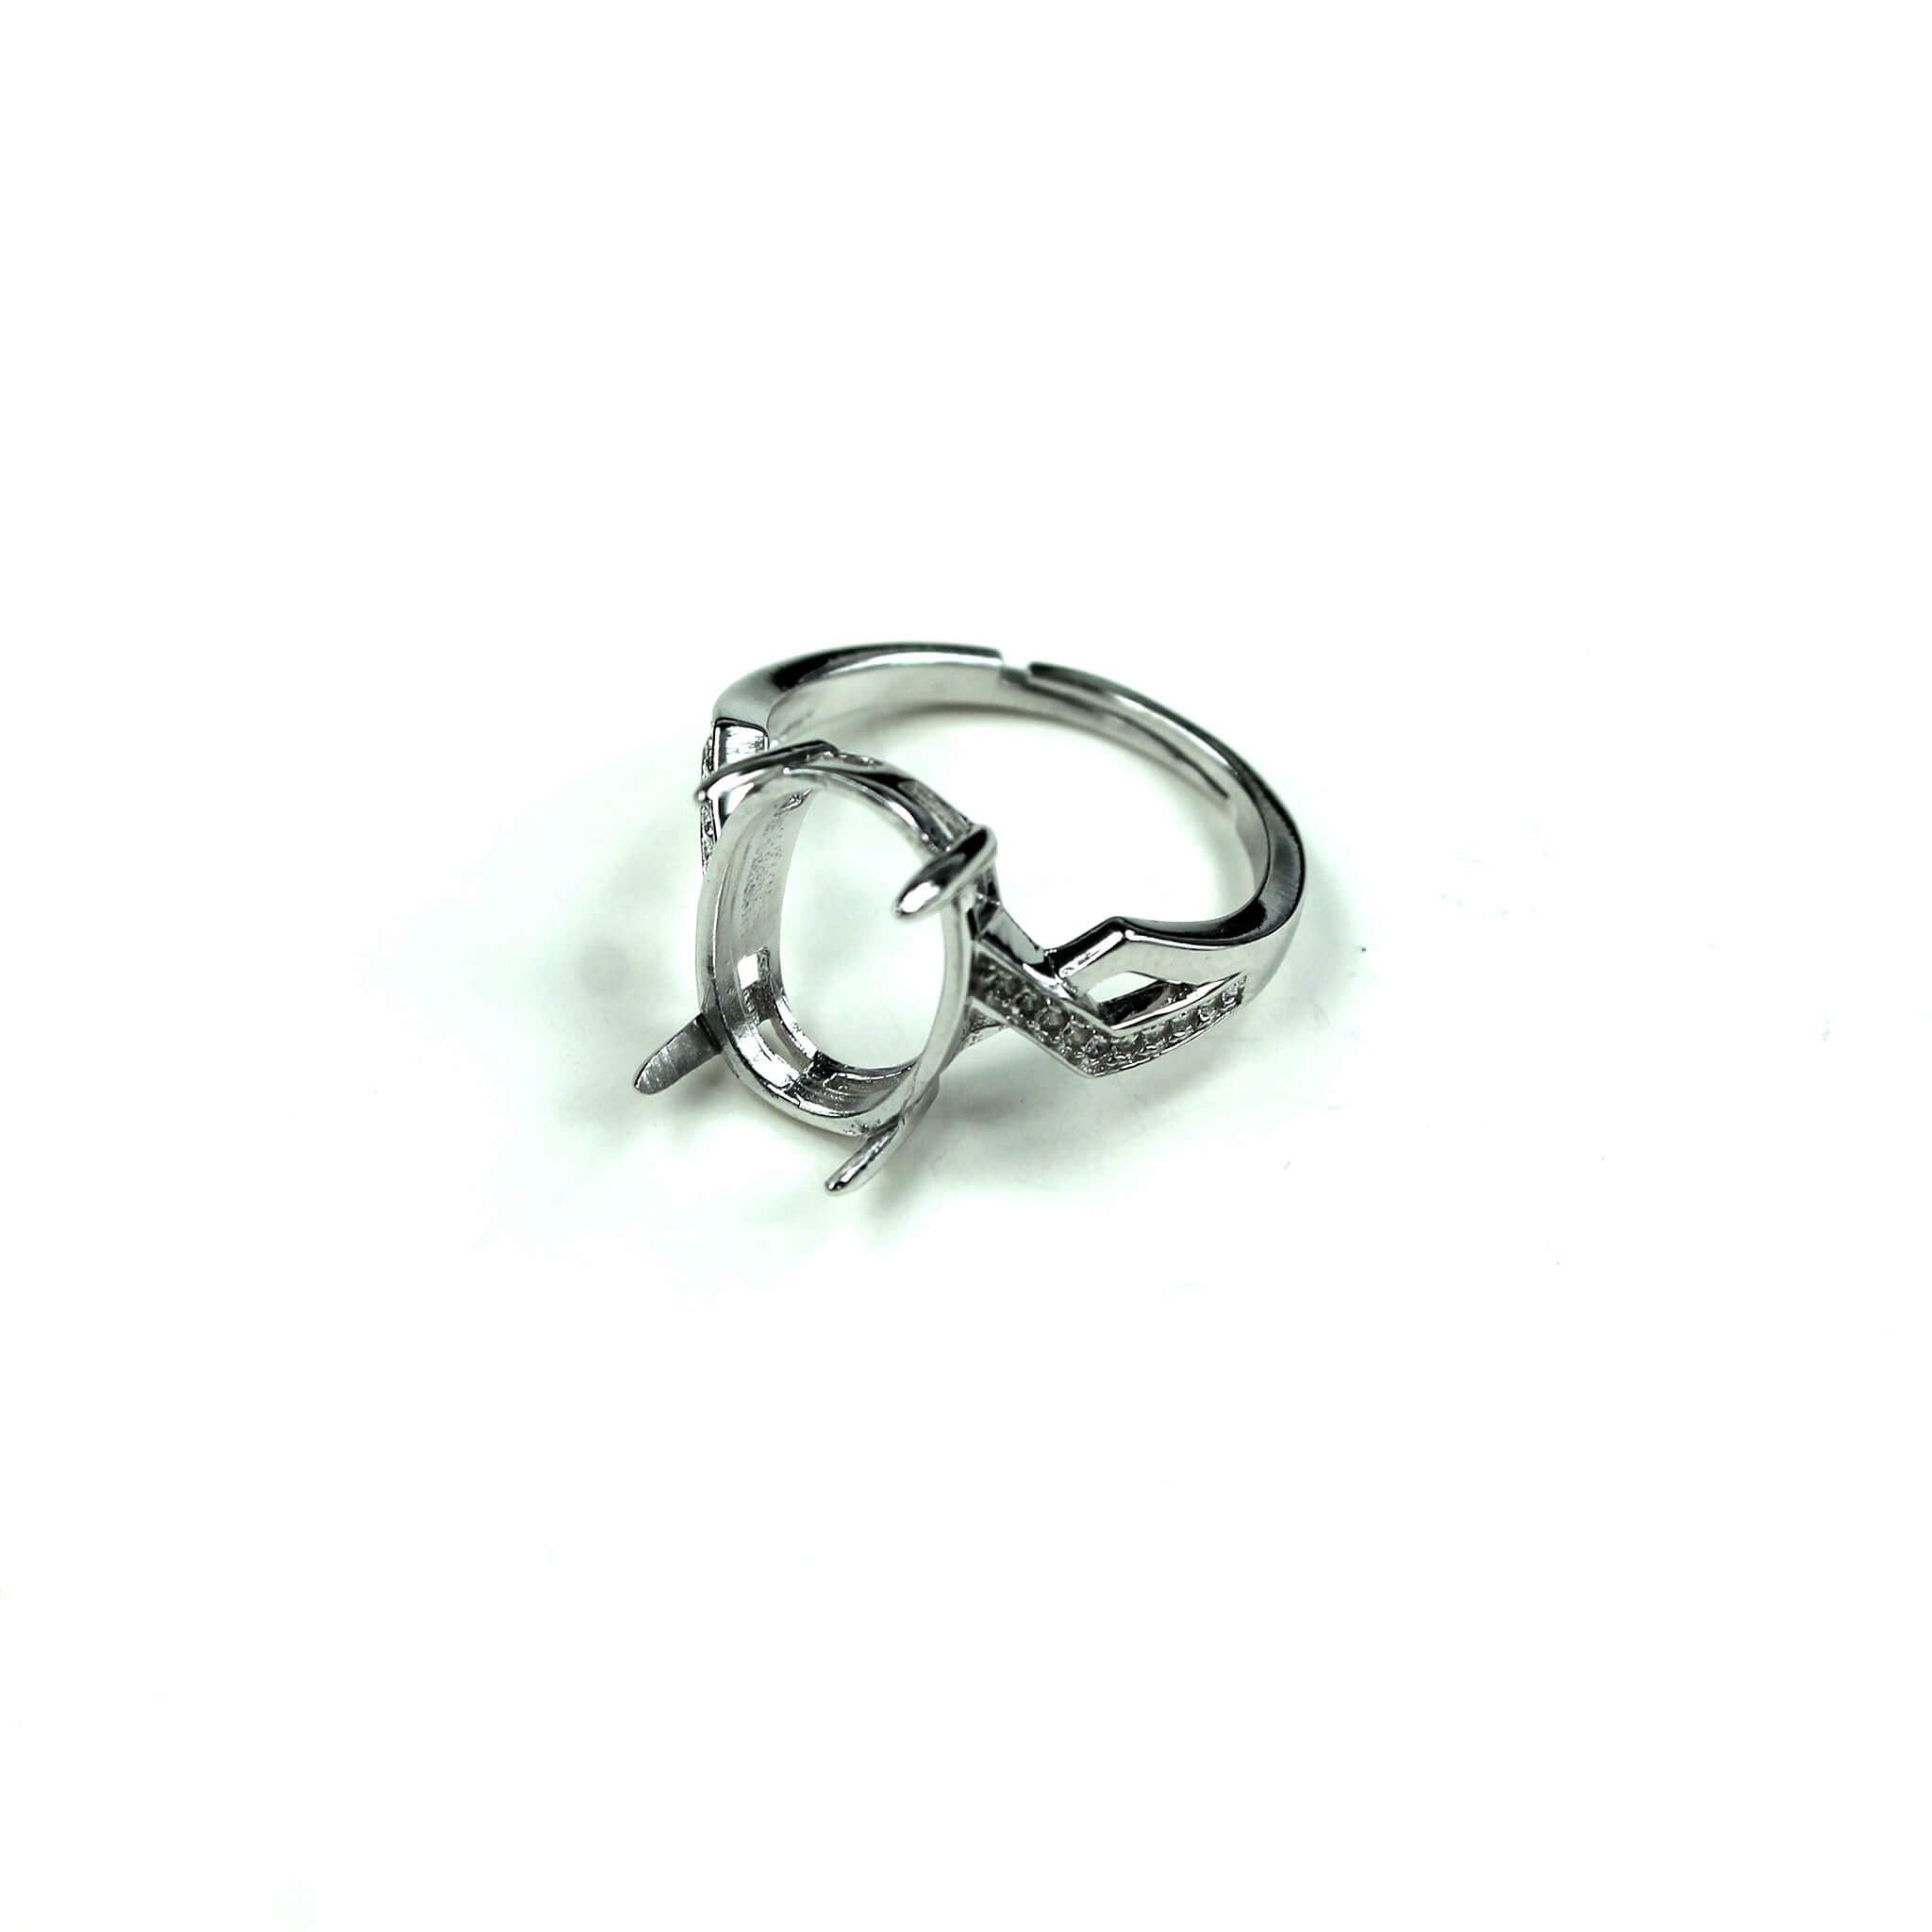 Unique Style Ring with Cubic Zirconia Inlays and Oval Prong Mounting in Sterling Silver 10x11mm